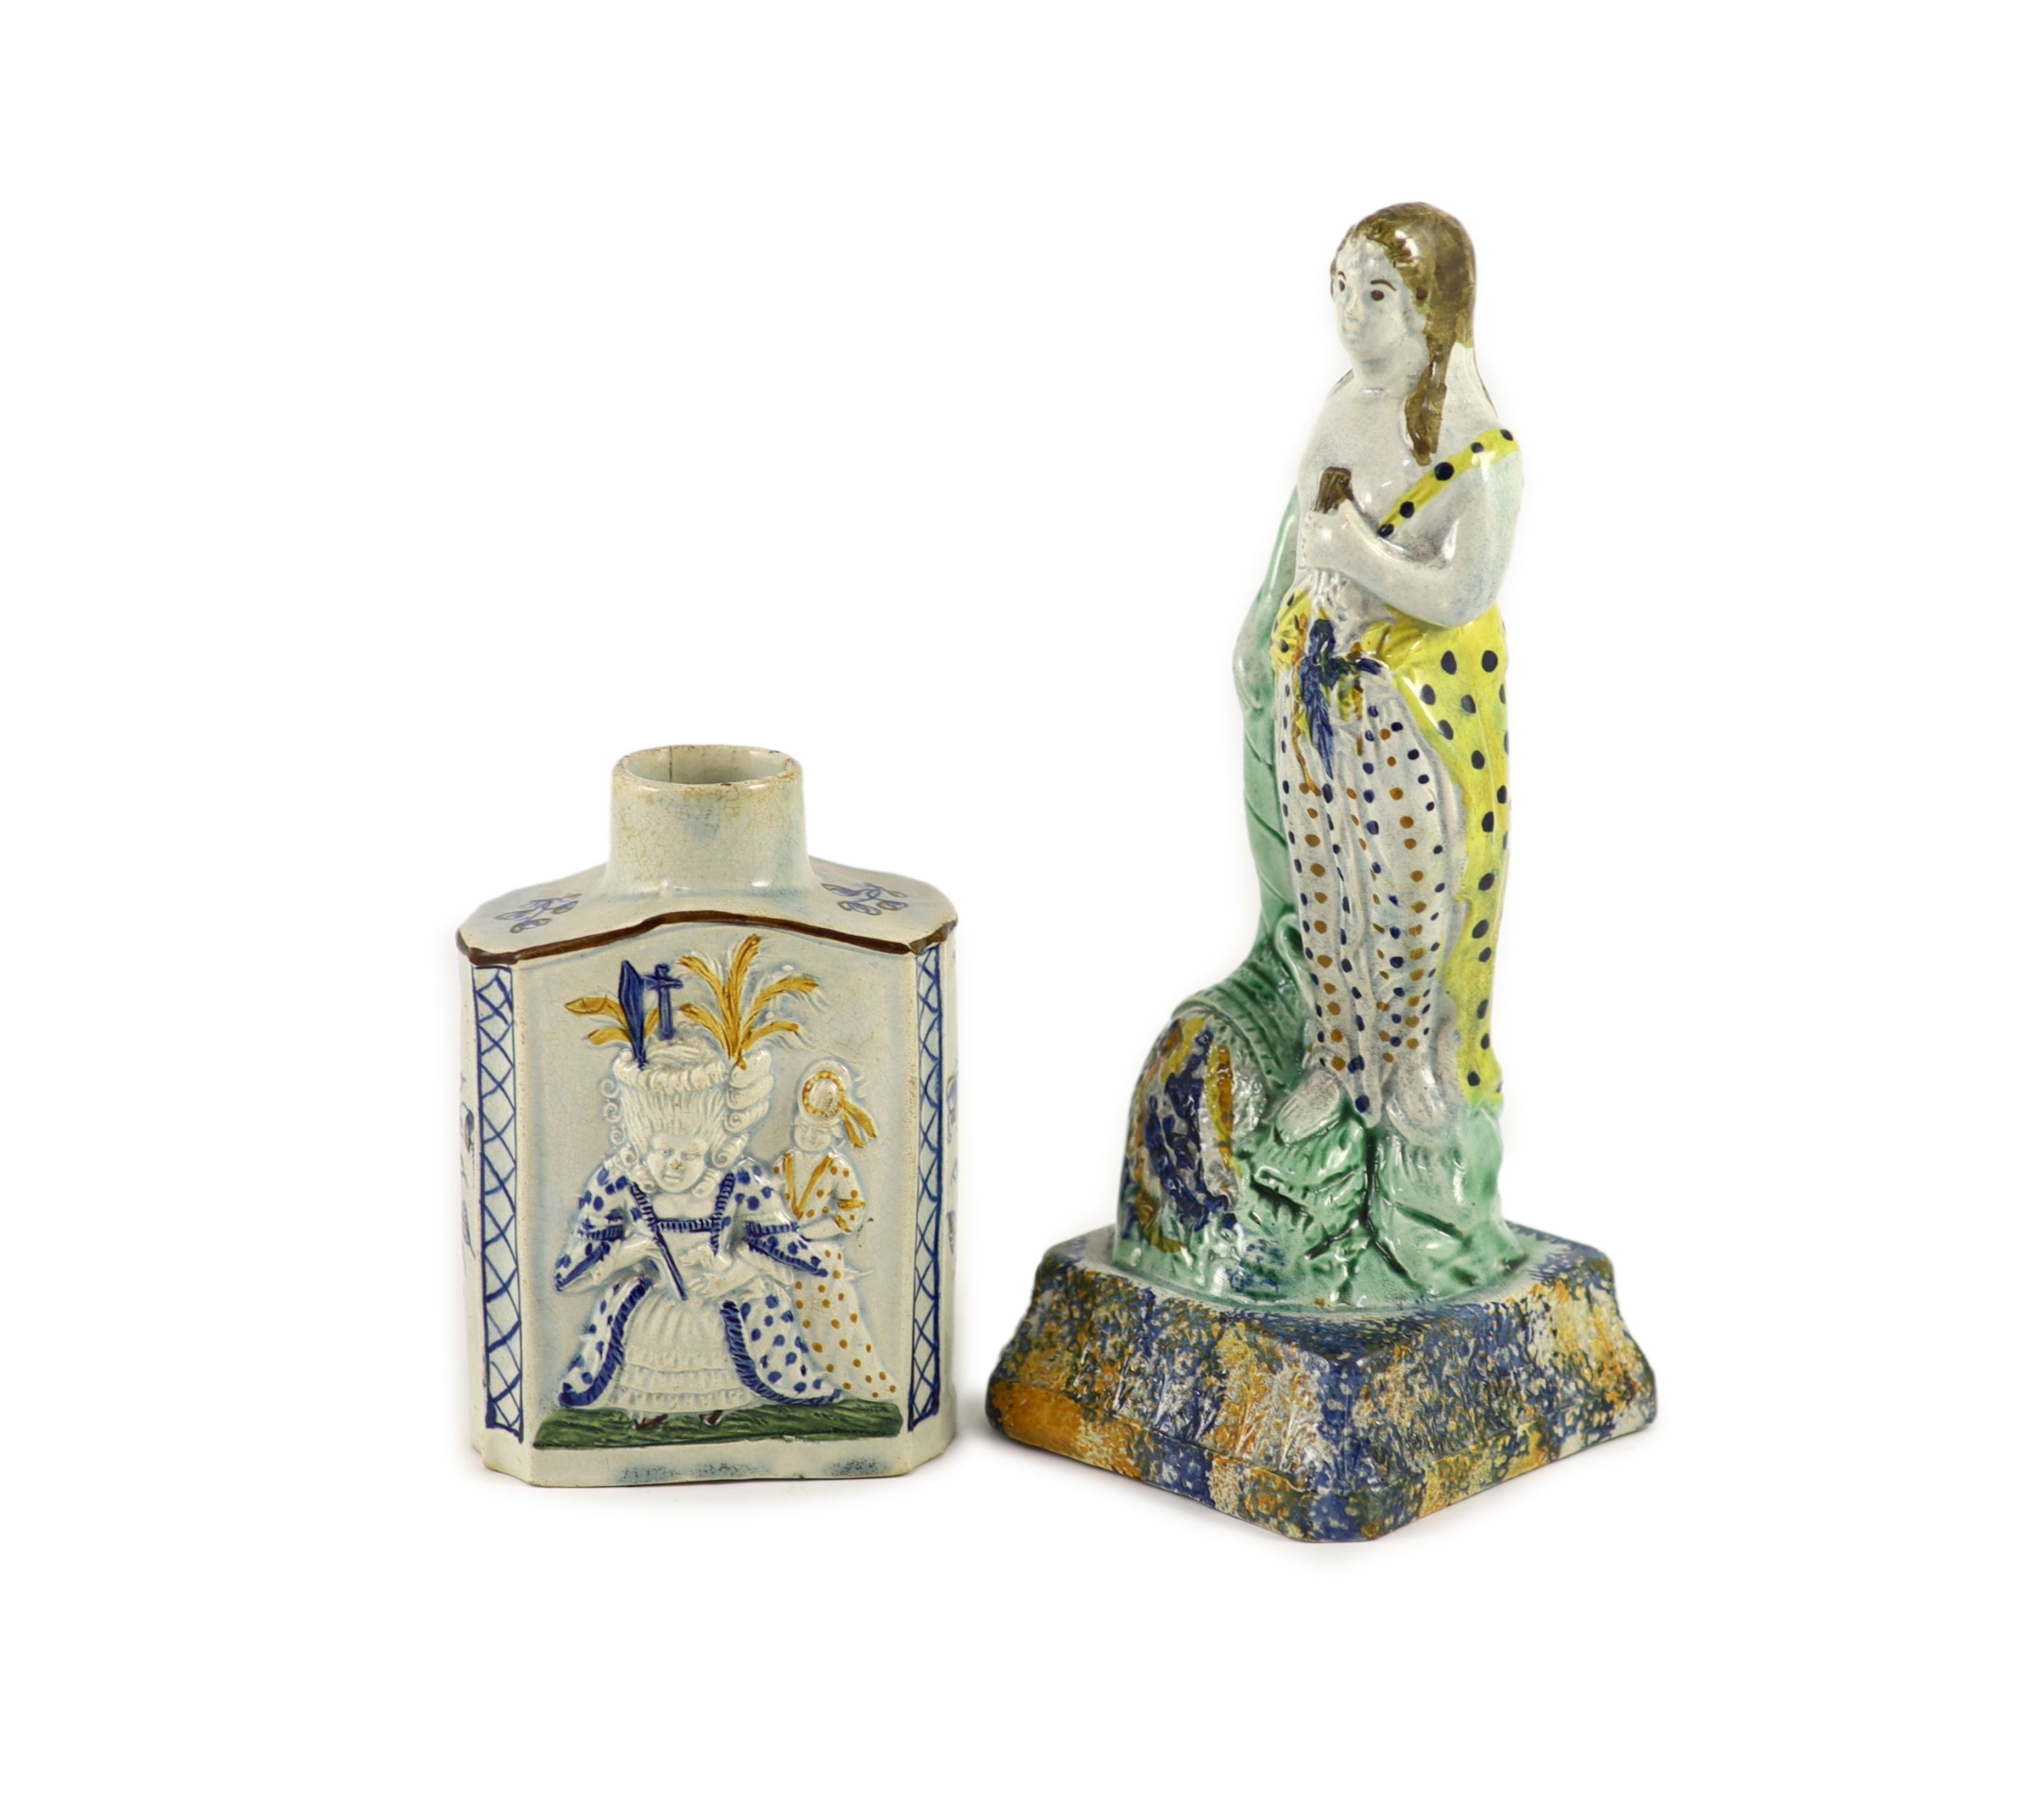 A Staffordshire Prattware pearlware tea caddy and figure of Flora, c.1790, 12.5 and 22cm high                                                                                                                               